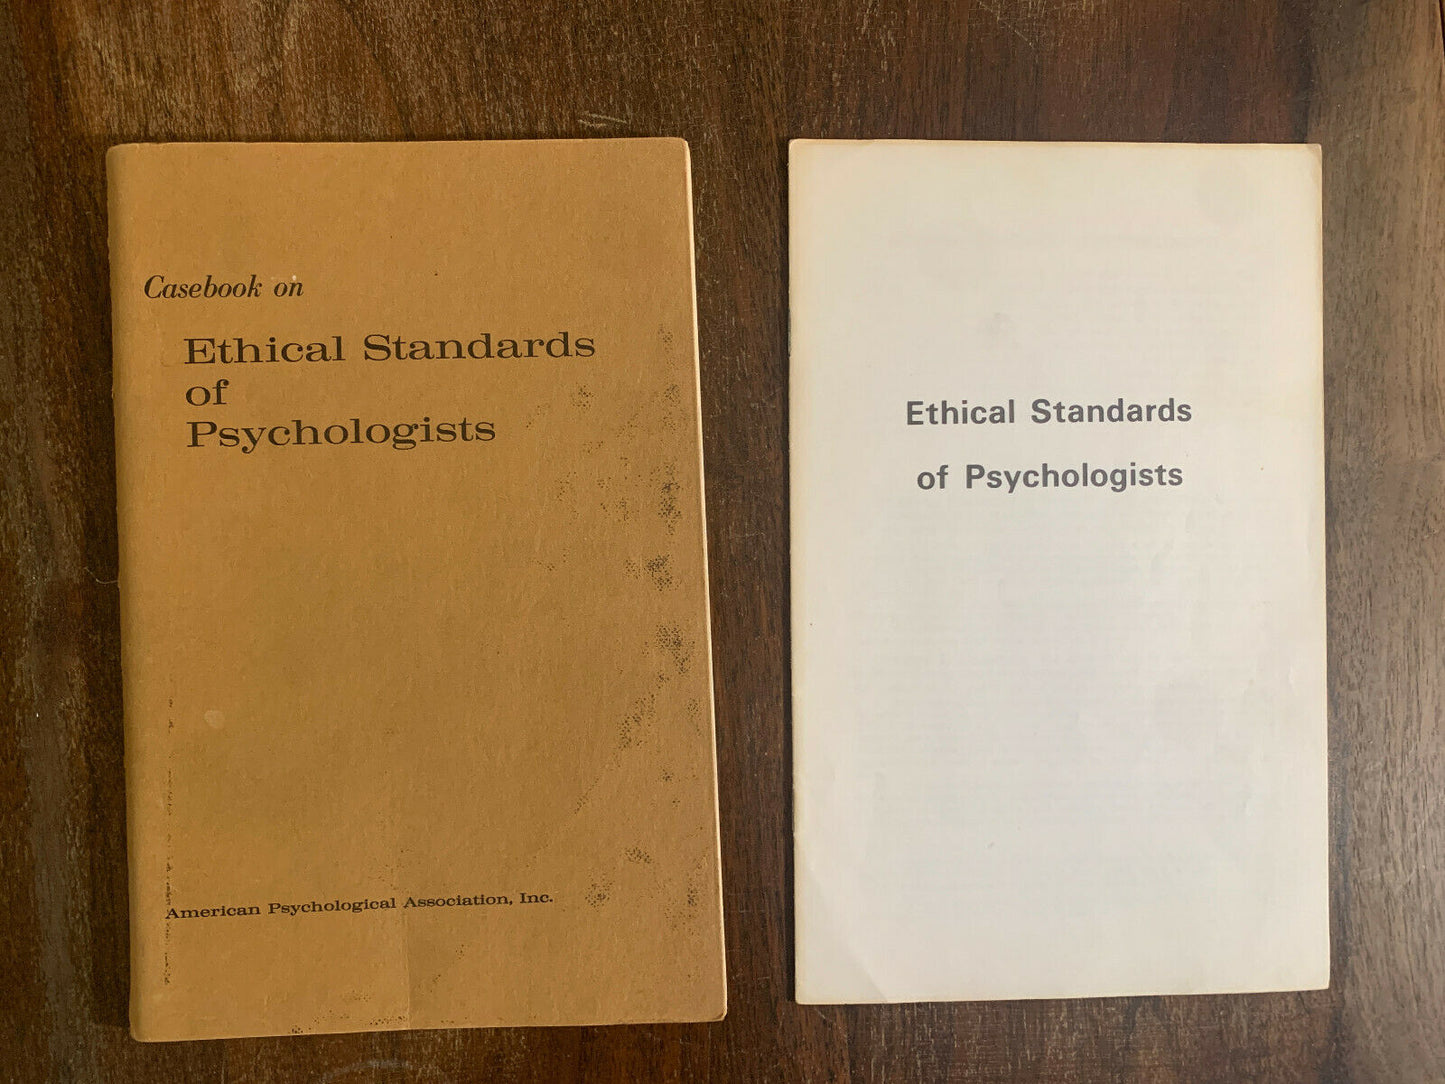 Casebook on Ethical Standards of Psychologists (Amer Psych Assn, 1974) PB (Z2)